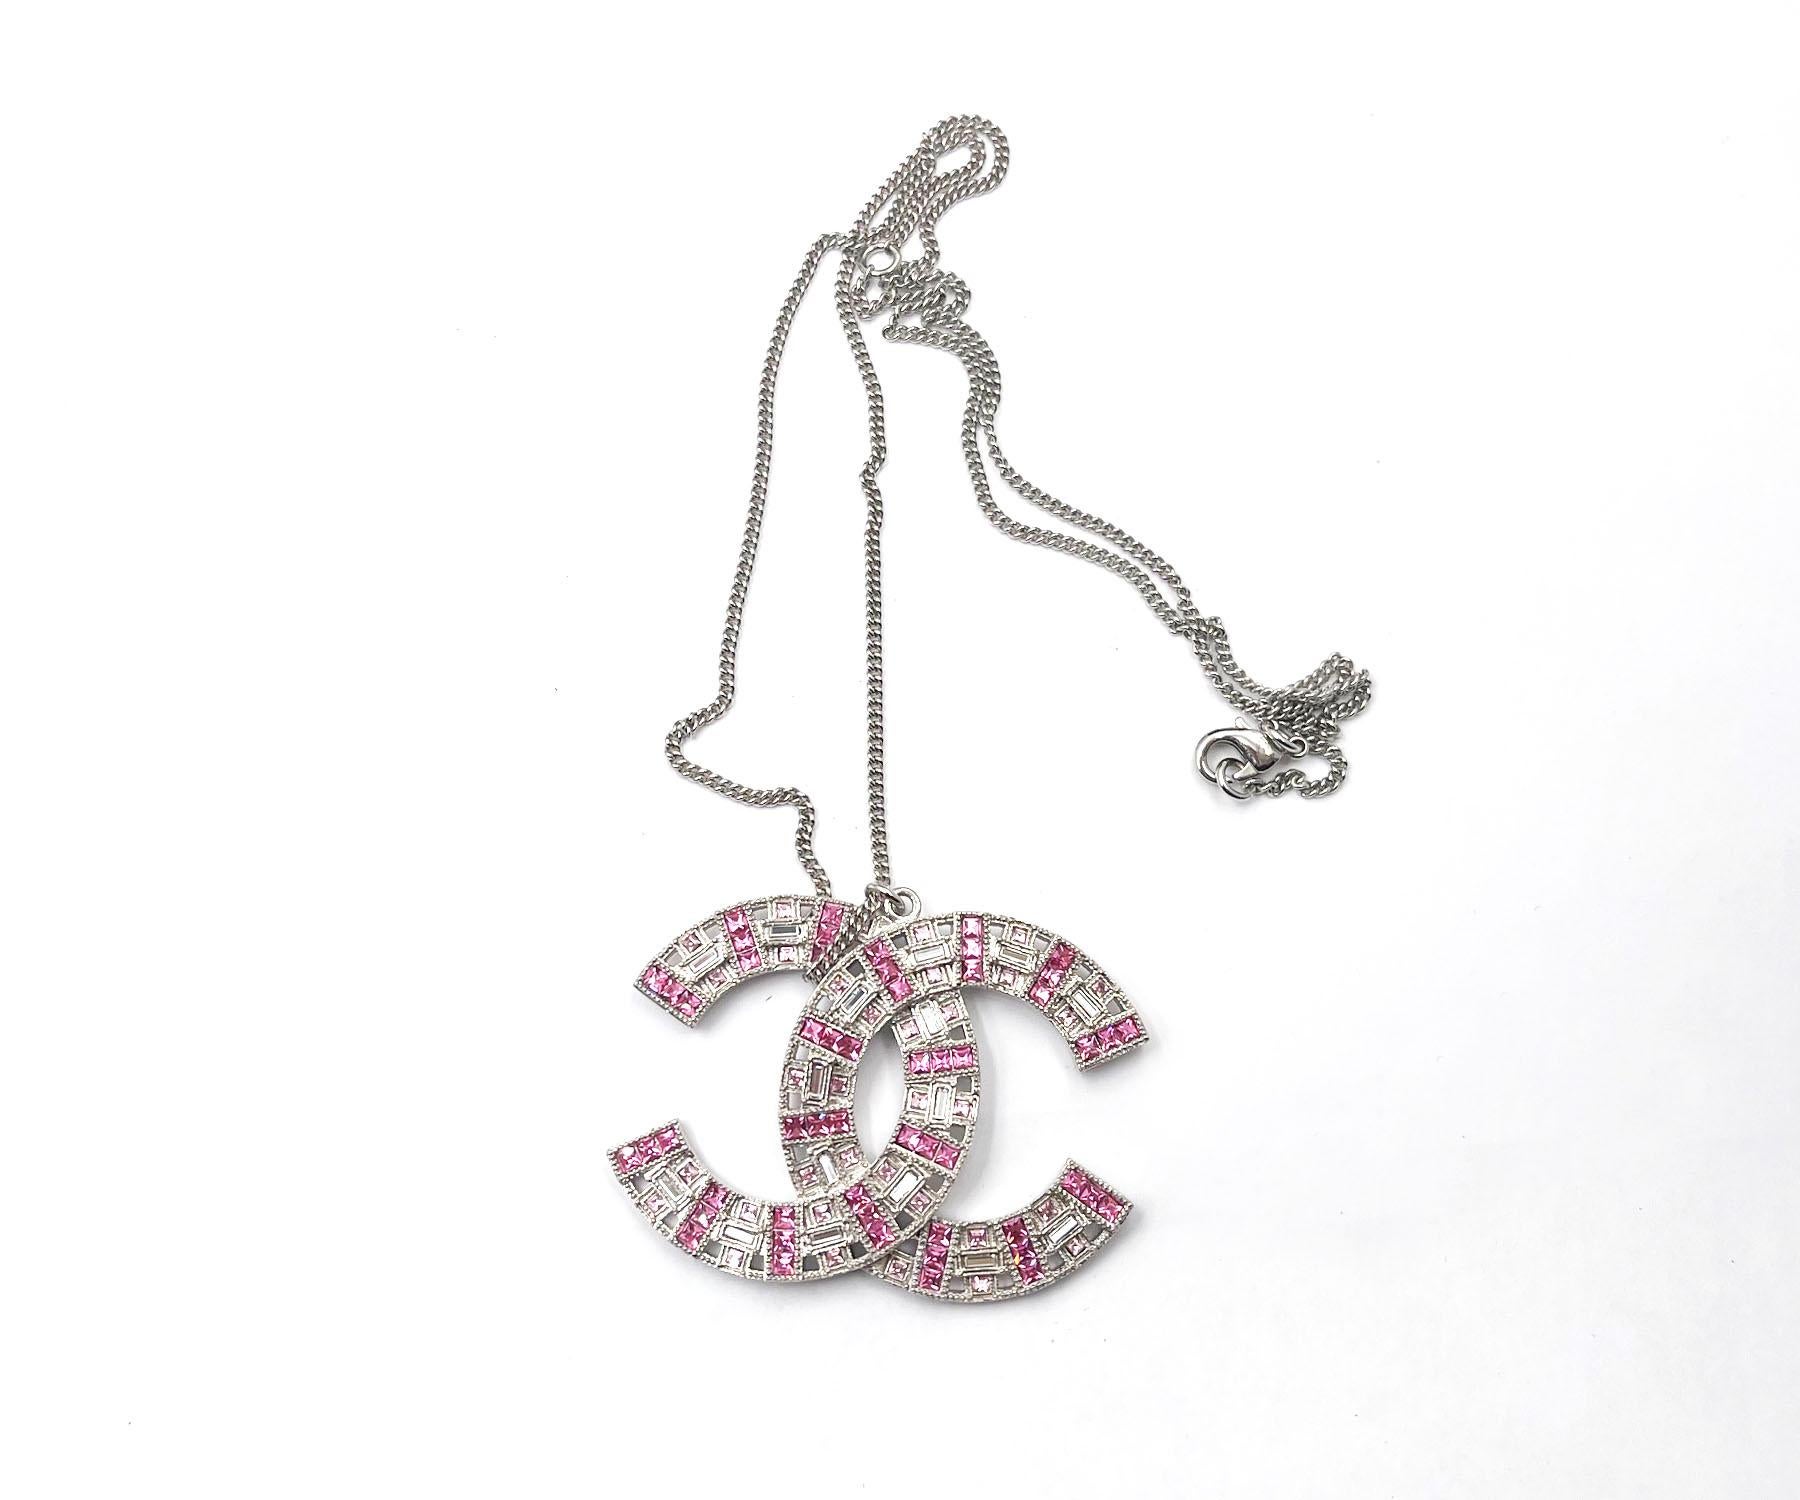 Chanel Classic Silver CC Pink Baguette Crystal Large Pendant Necklace

*Marked 17
*Made in France
*Comes with the original box and pouch

-It is approximately 16